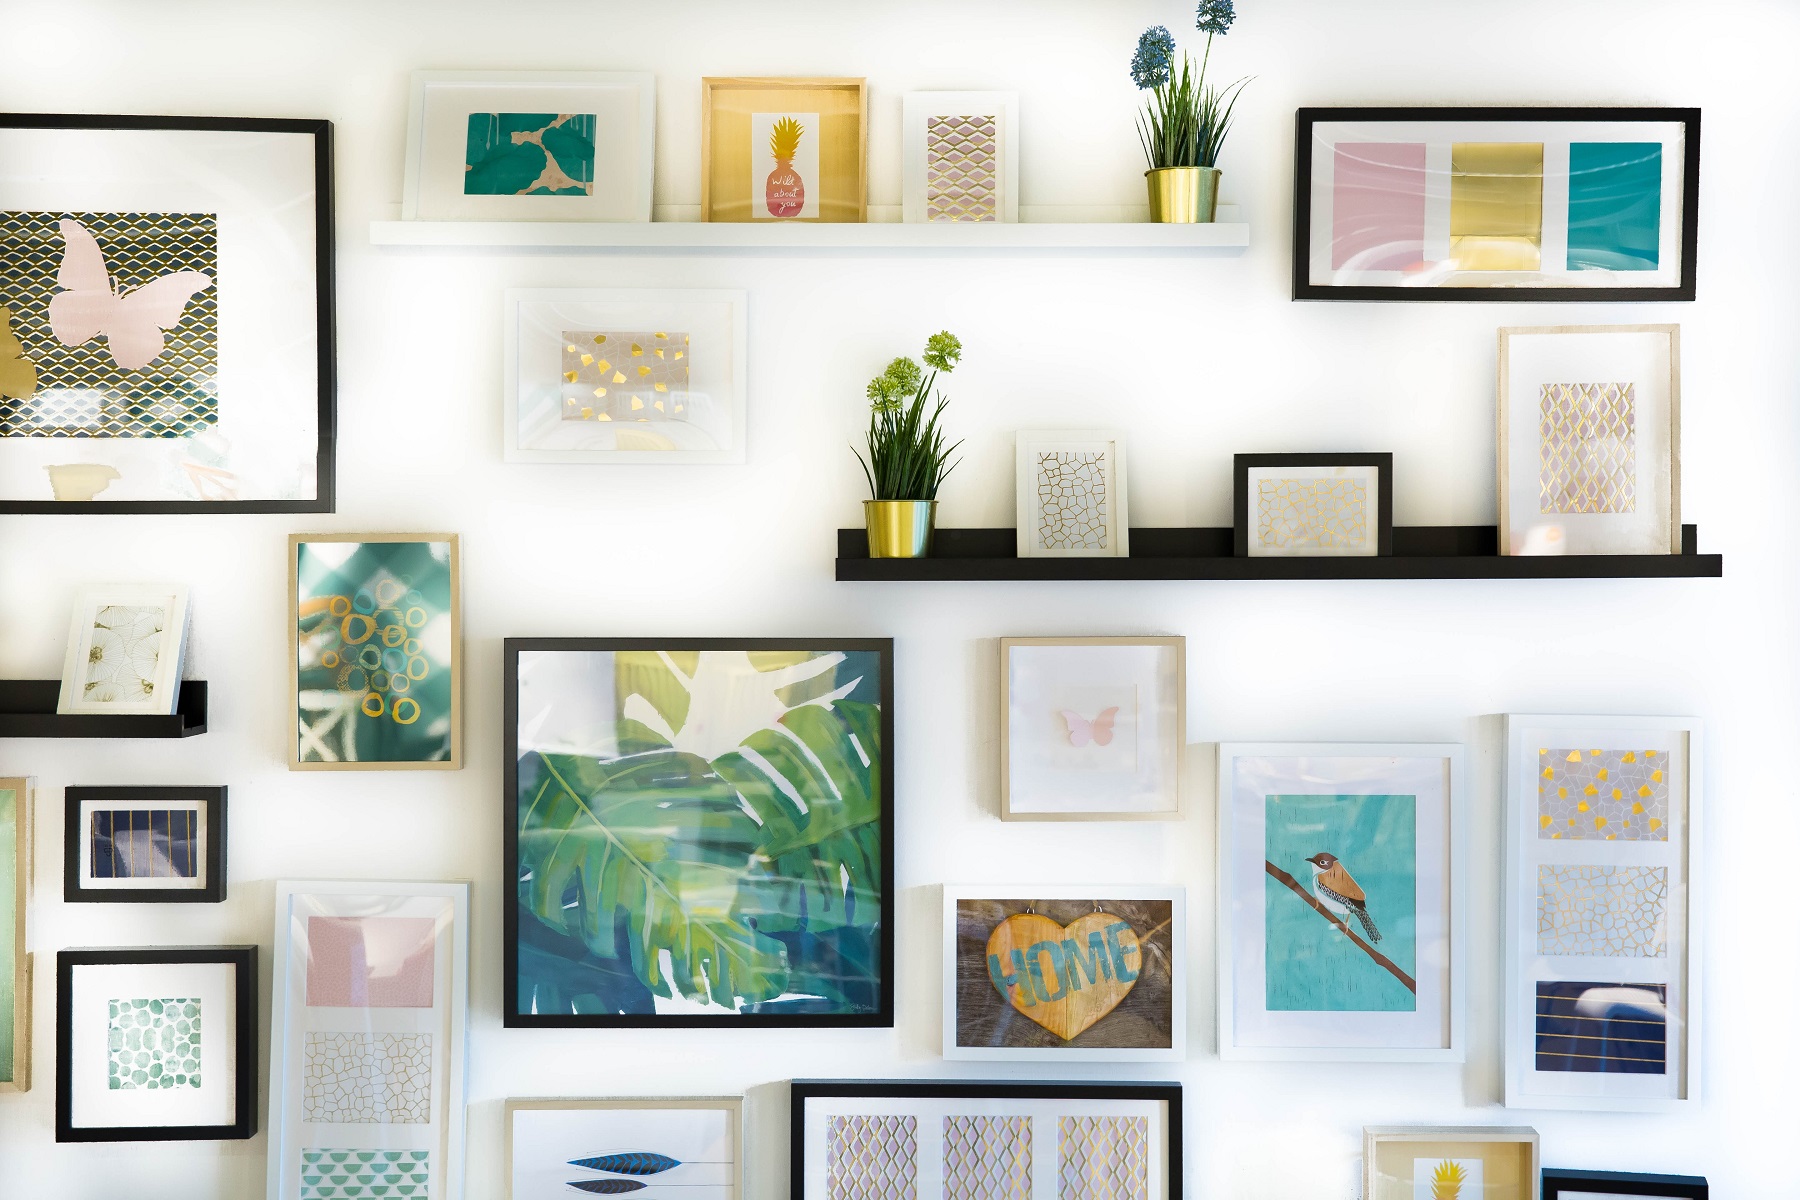 Gallery wall in home office, featuring a mirror, artwork, and notecards